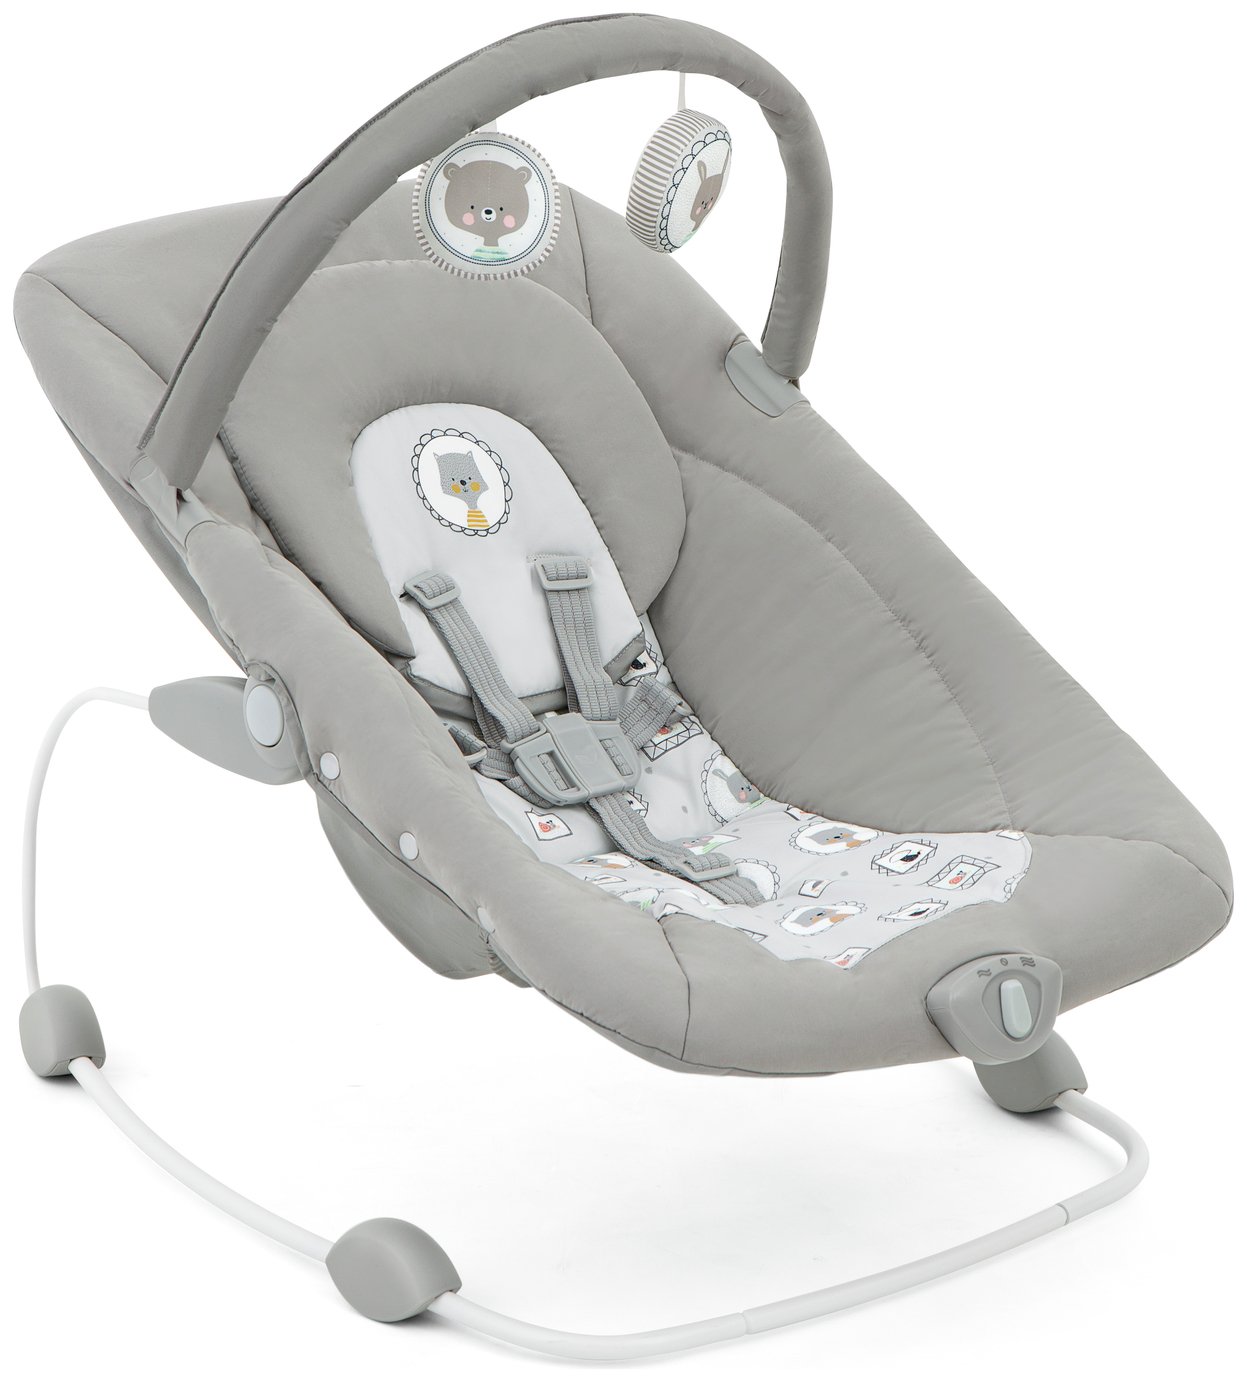 Joie Wish Baby Bouncer review